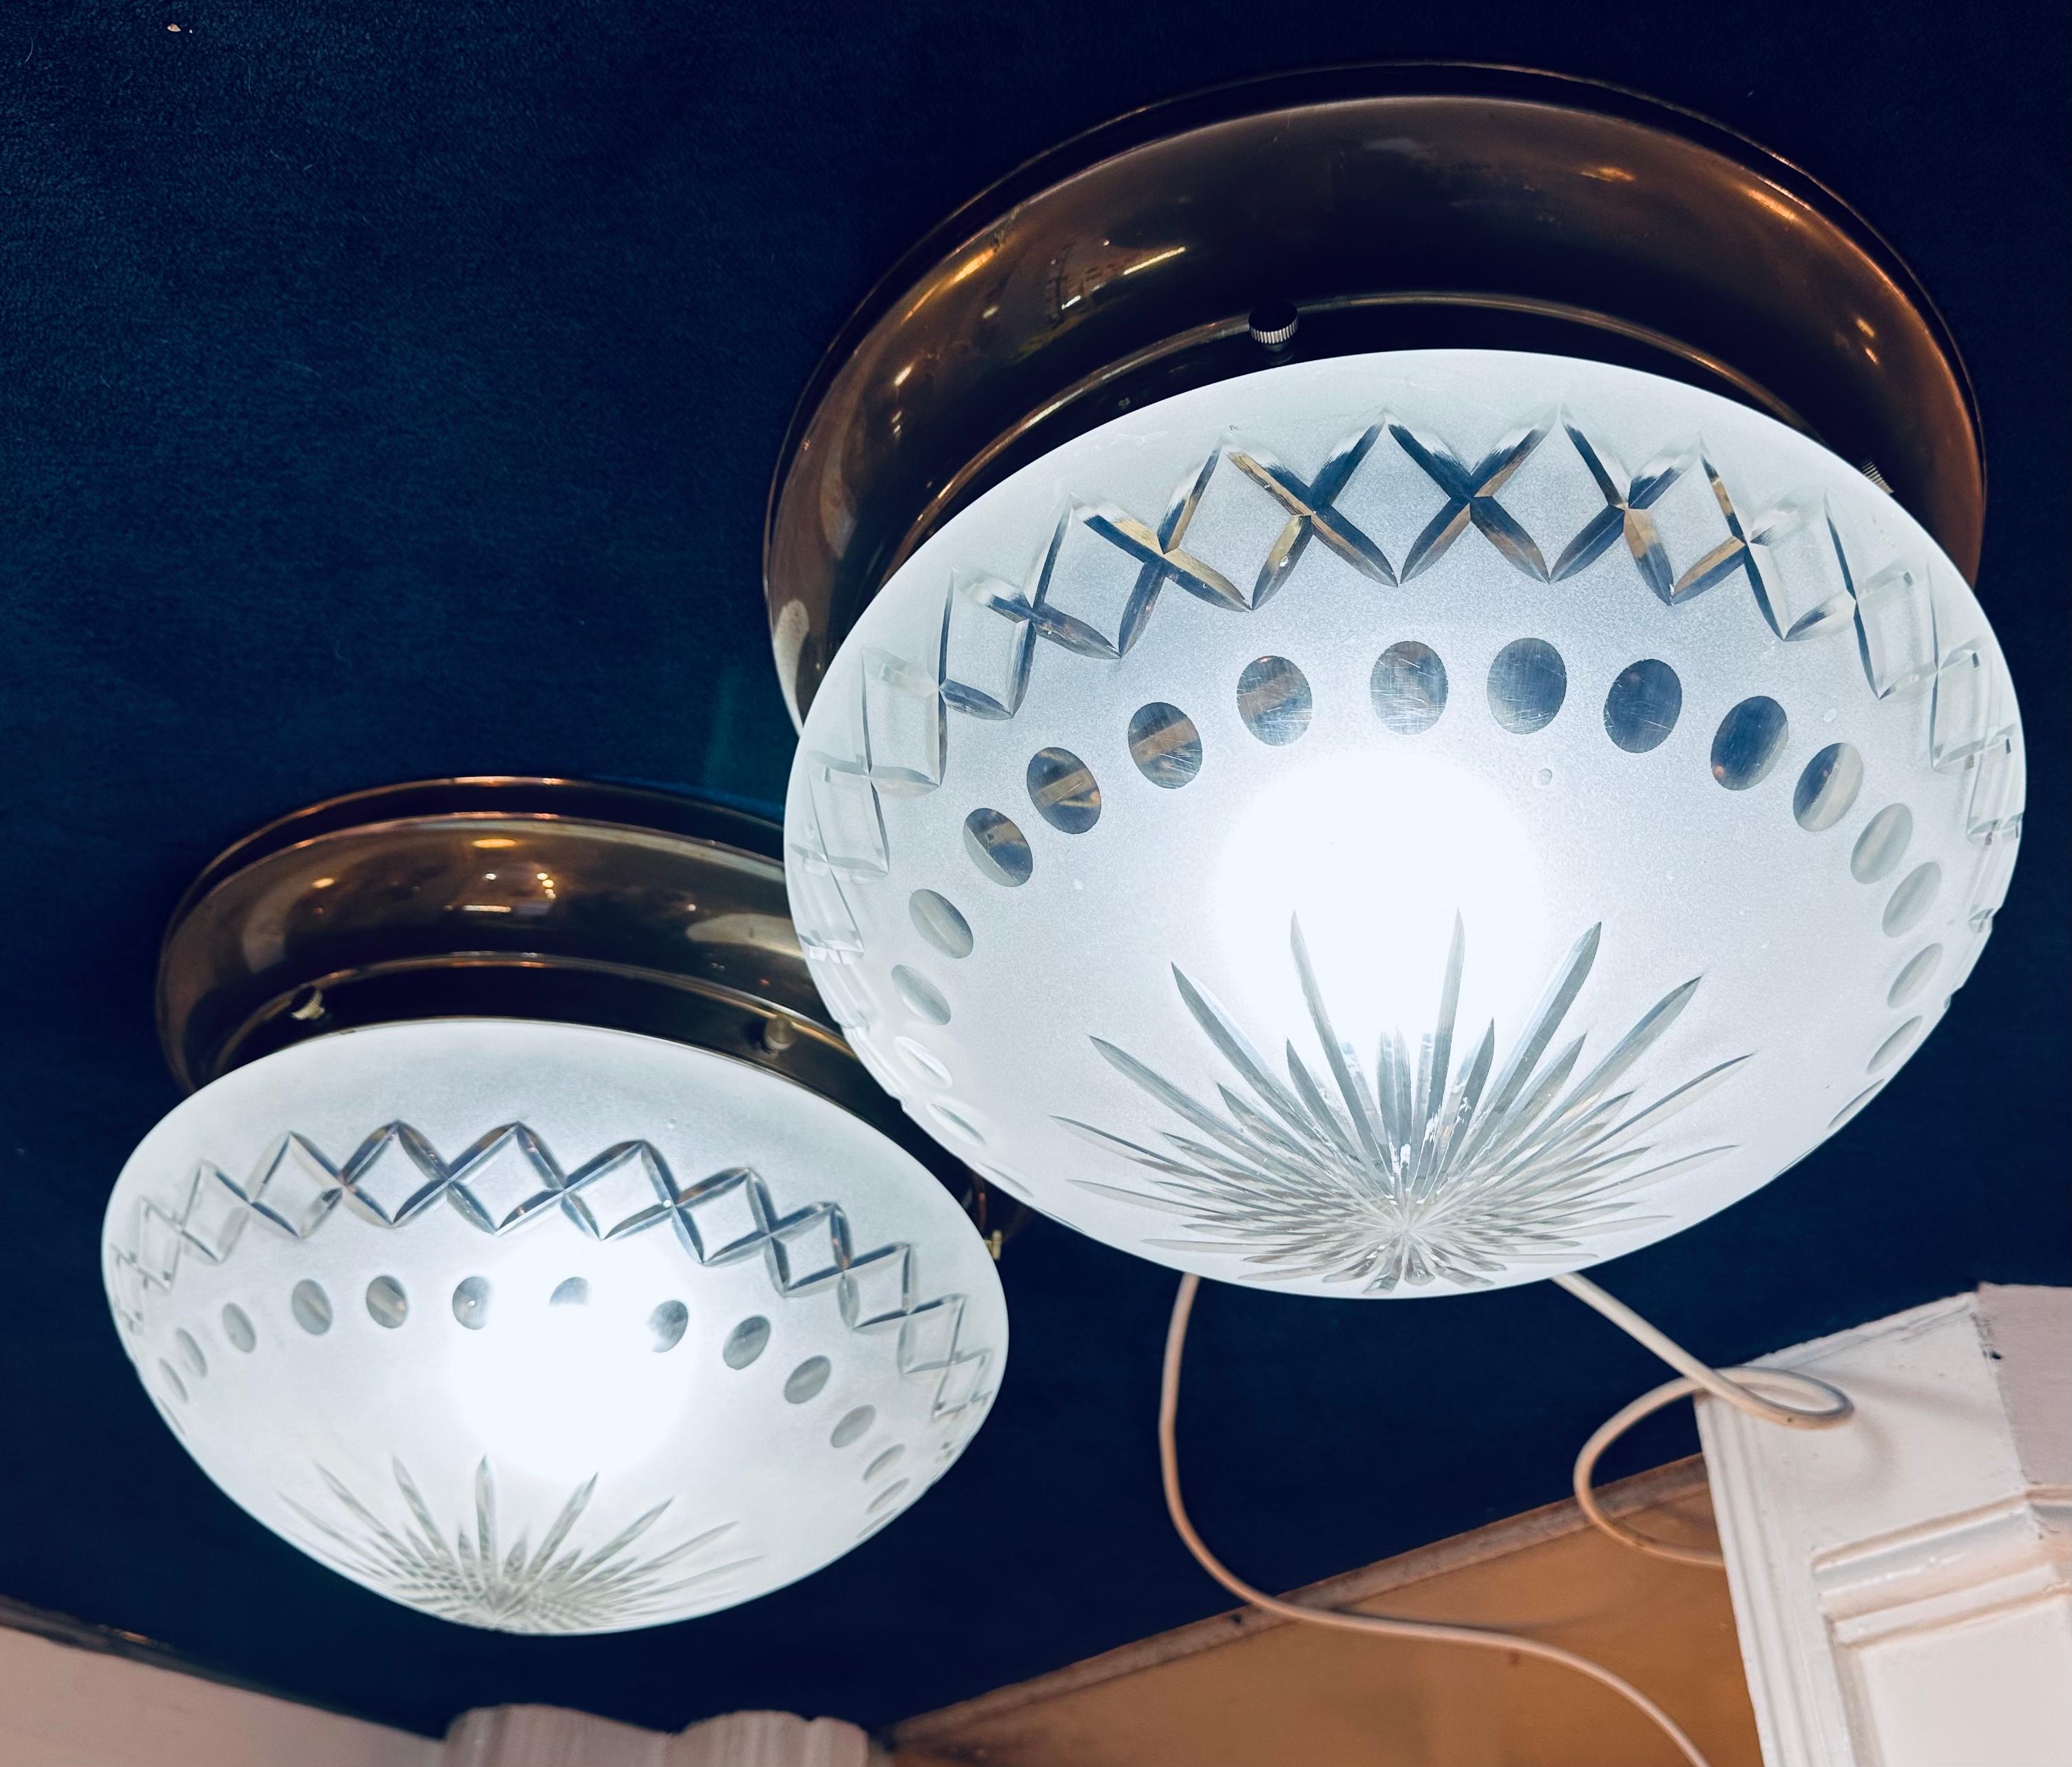 Pair of 1960s French frosted and cut glass flush mount ceiling lights which could also be used as wall lights. The heavy thick frosted glass shade features cut glass star shaped design in the centre, rows of circles in the middle and a triangular